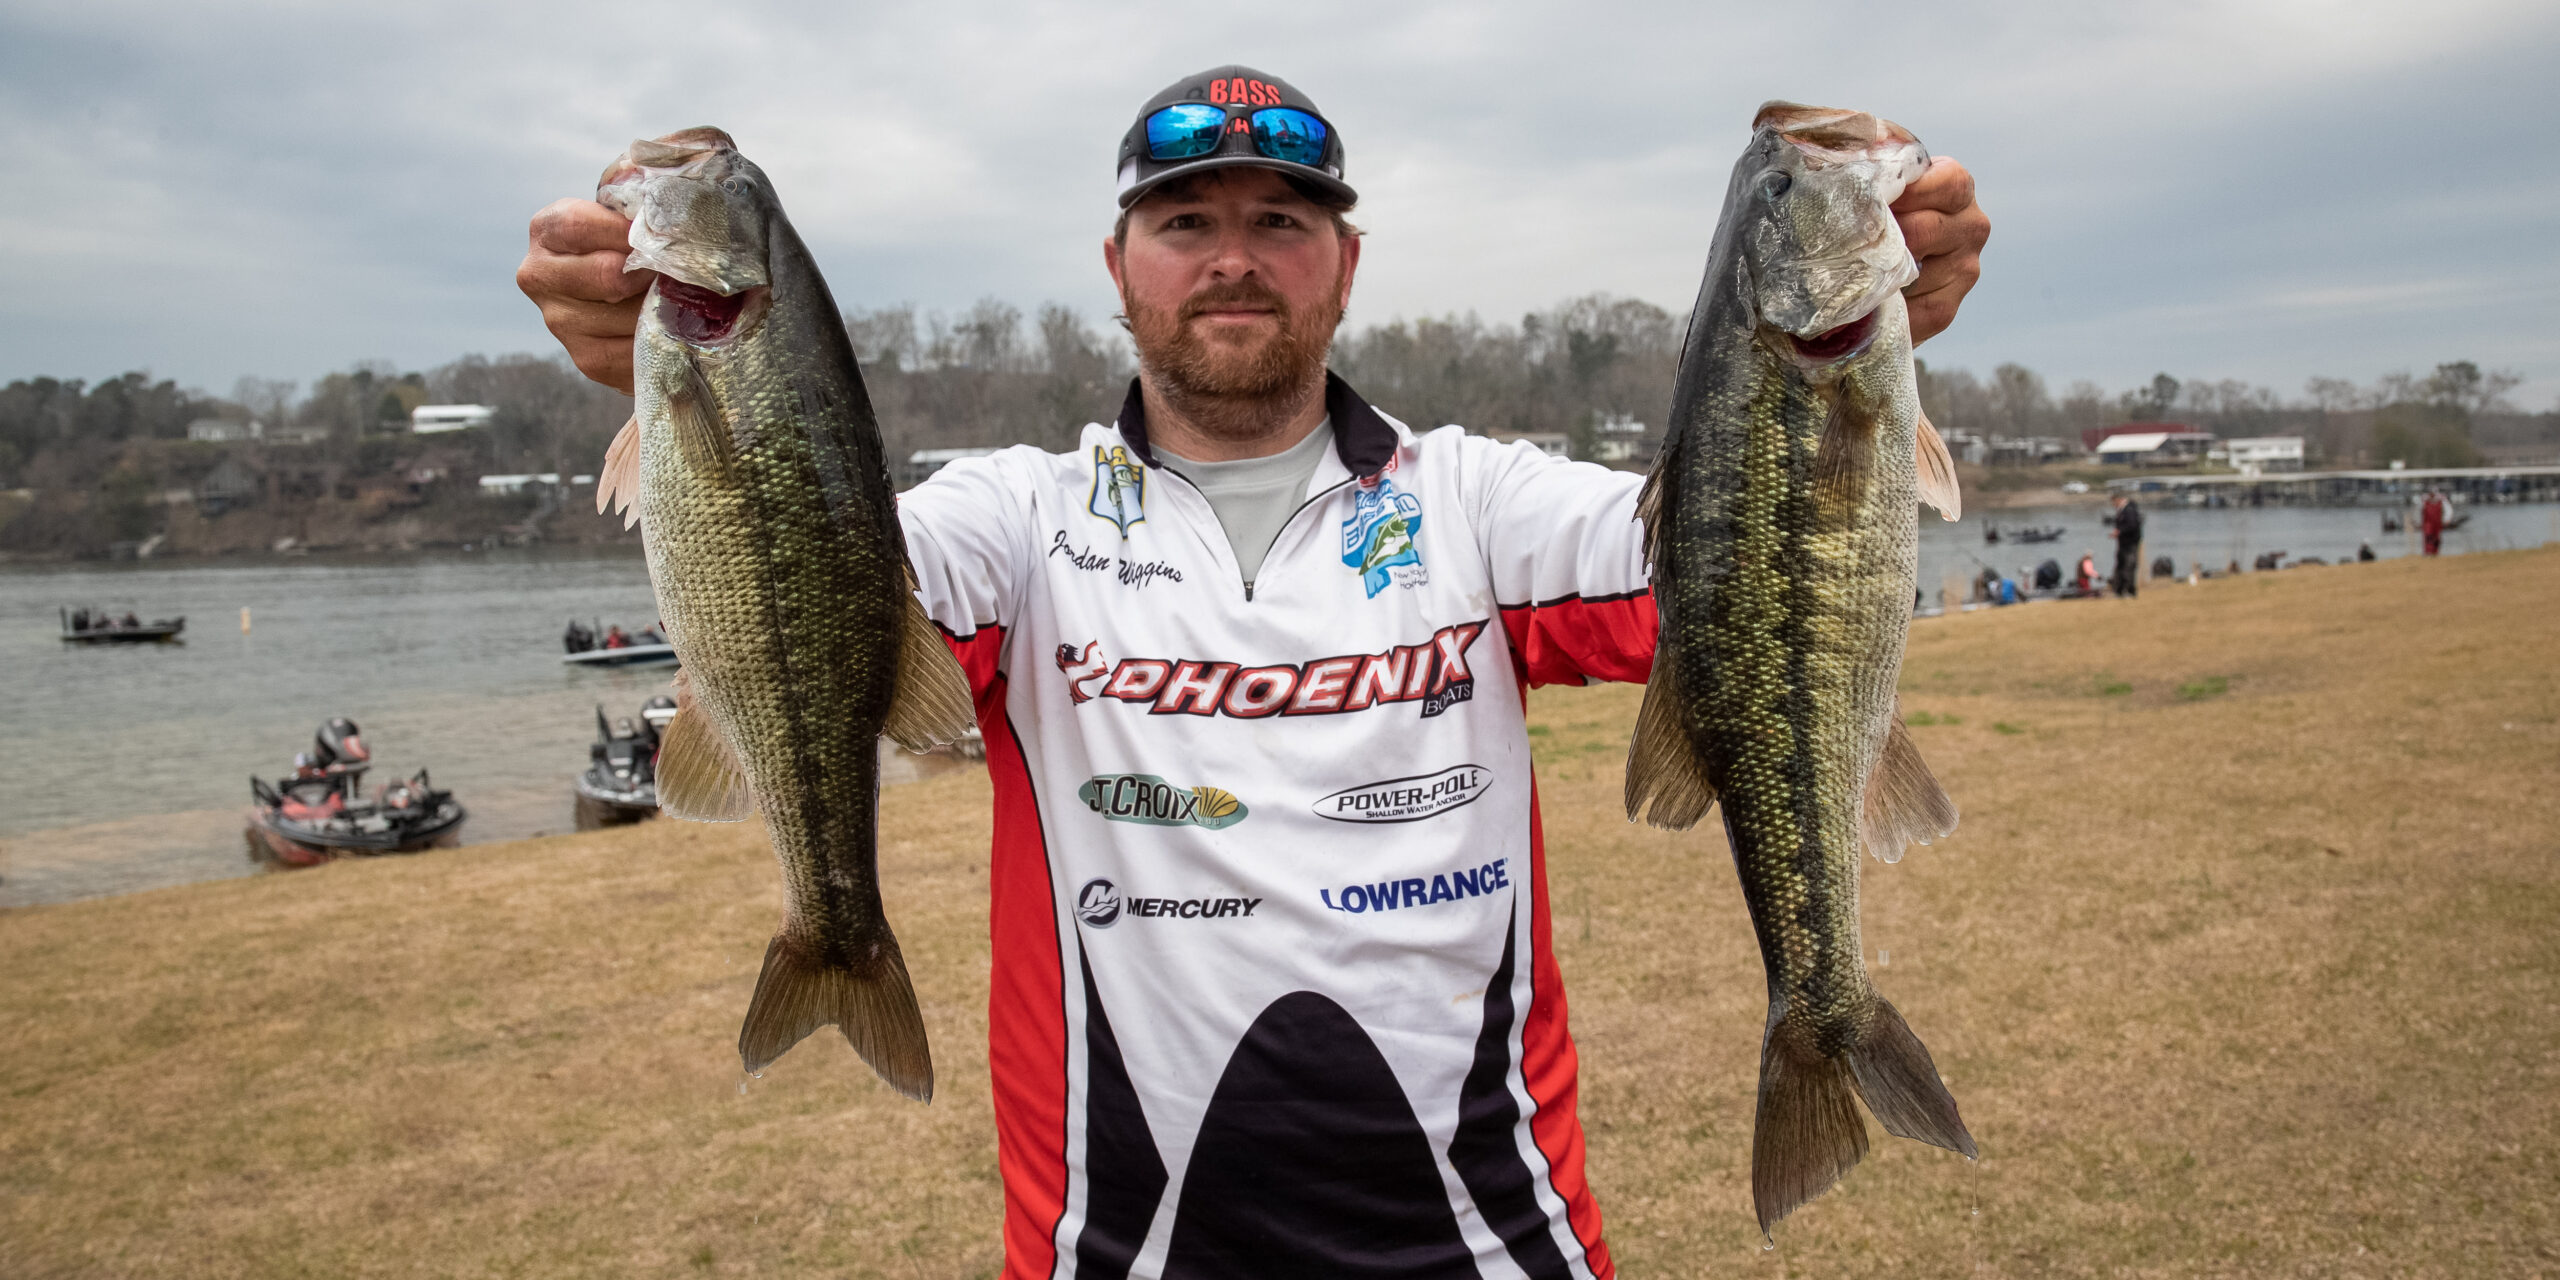 Wiggins moves ahead on Day 2 at Smith - Major League Fishing